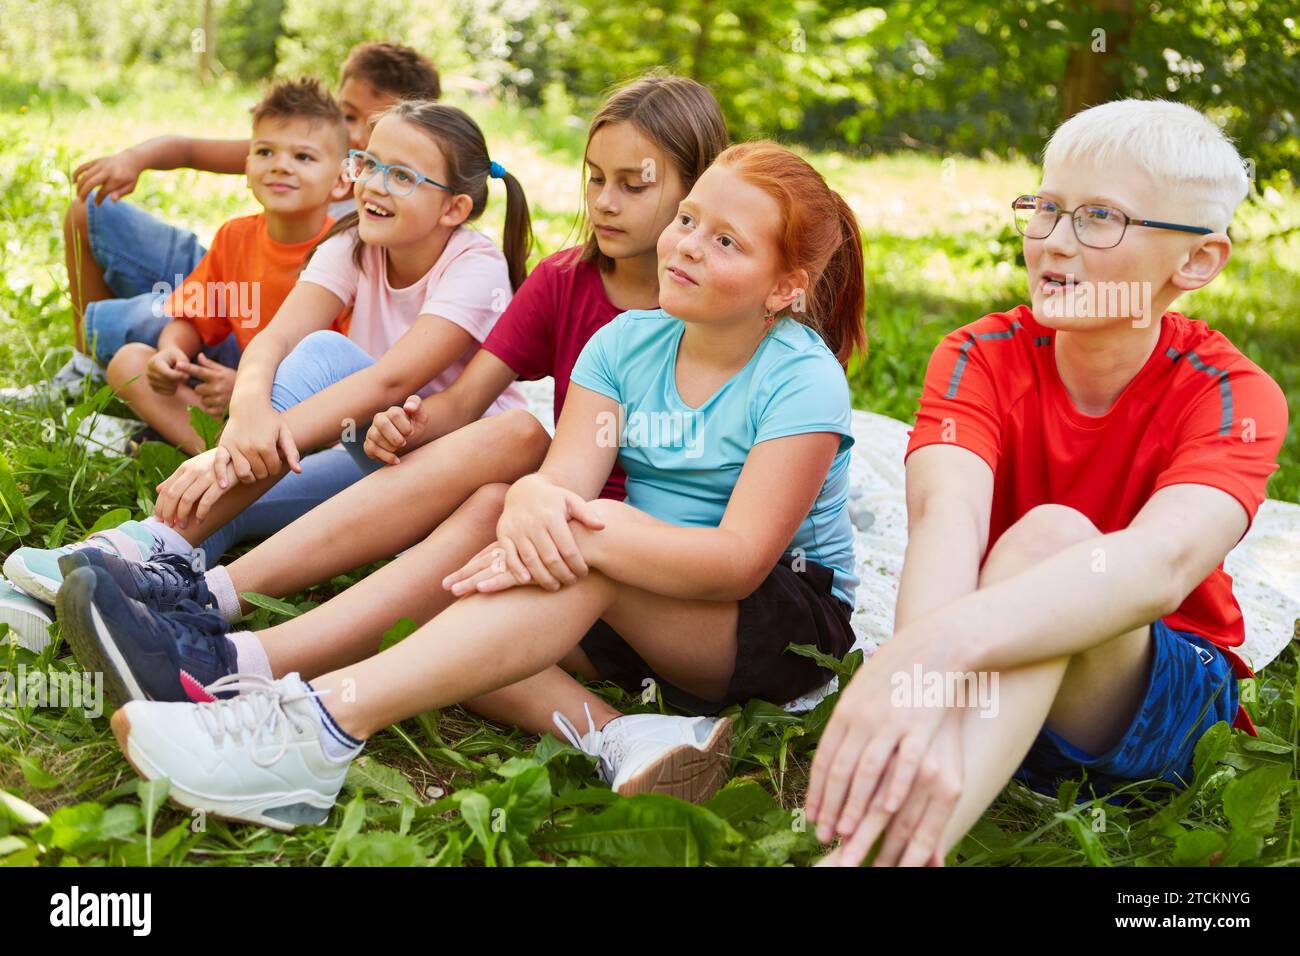 Smiling male and female friends looking away while sitting together on grass at park Stock Photo